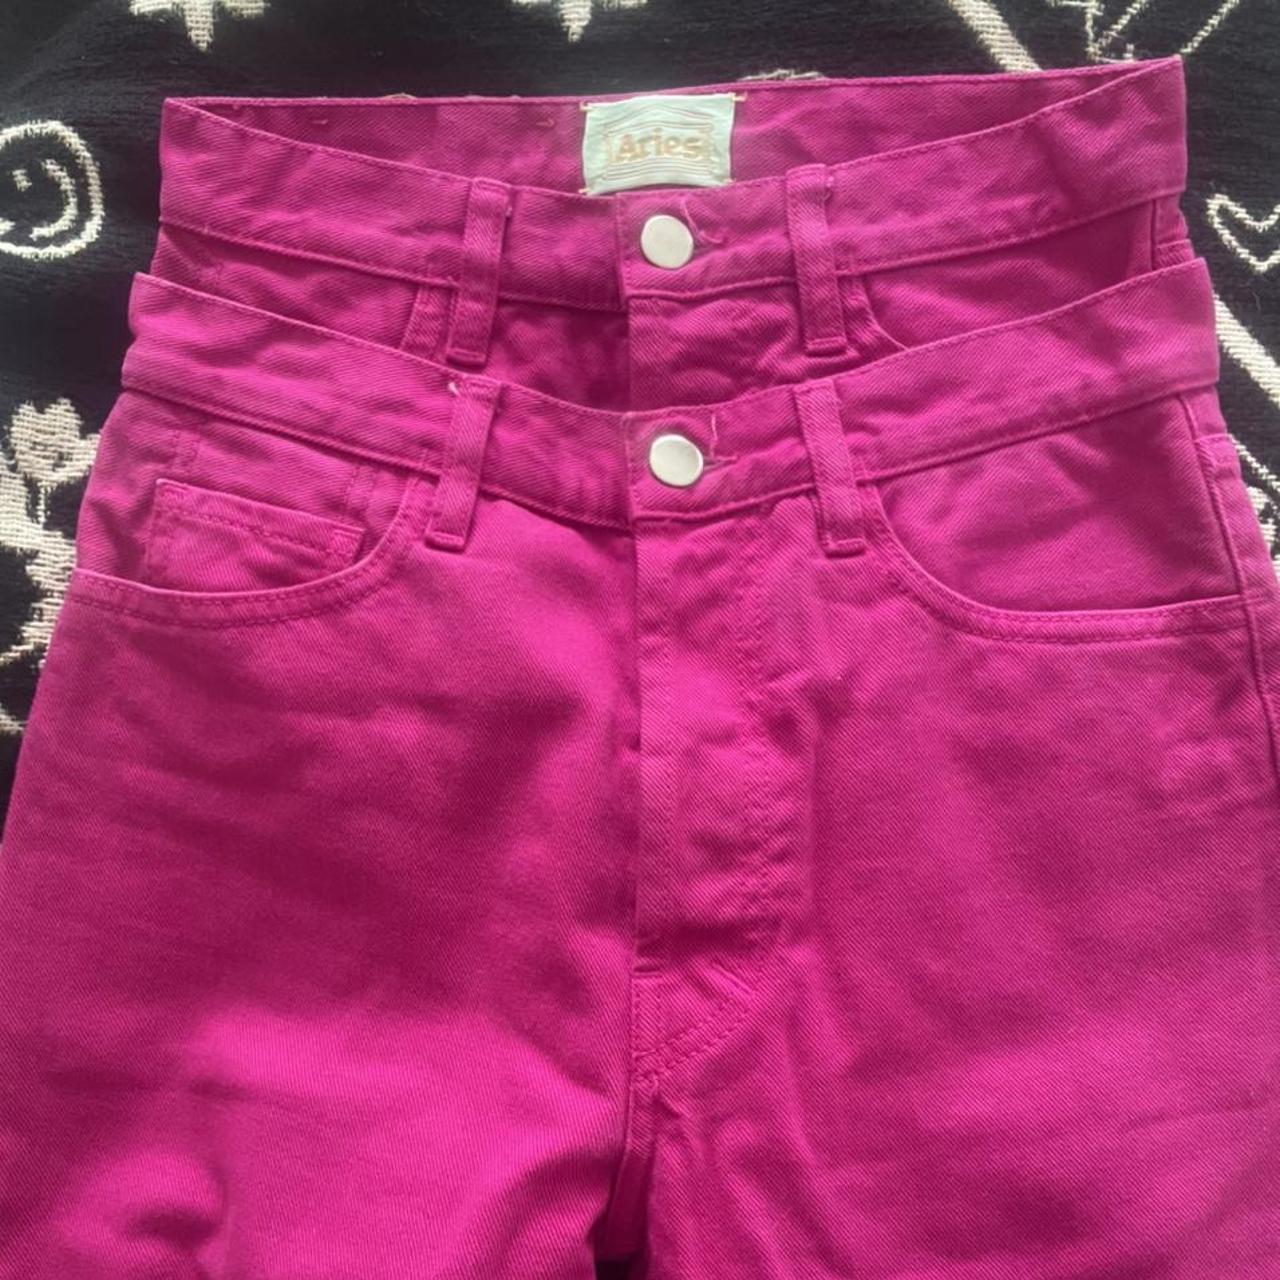 ARIES pink double waisted jeans Size 25 Barely used - Depop